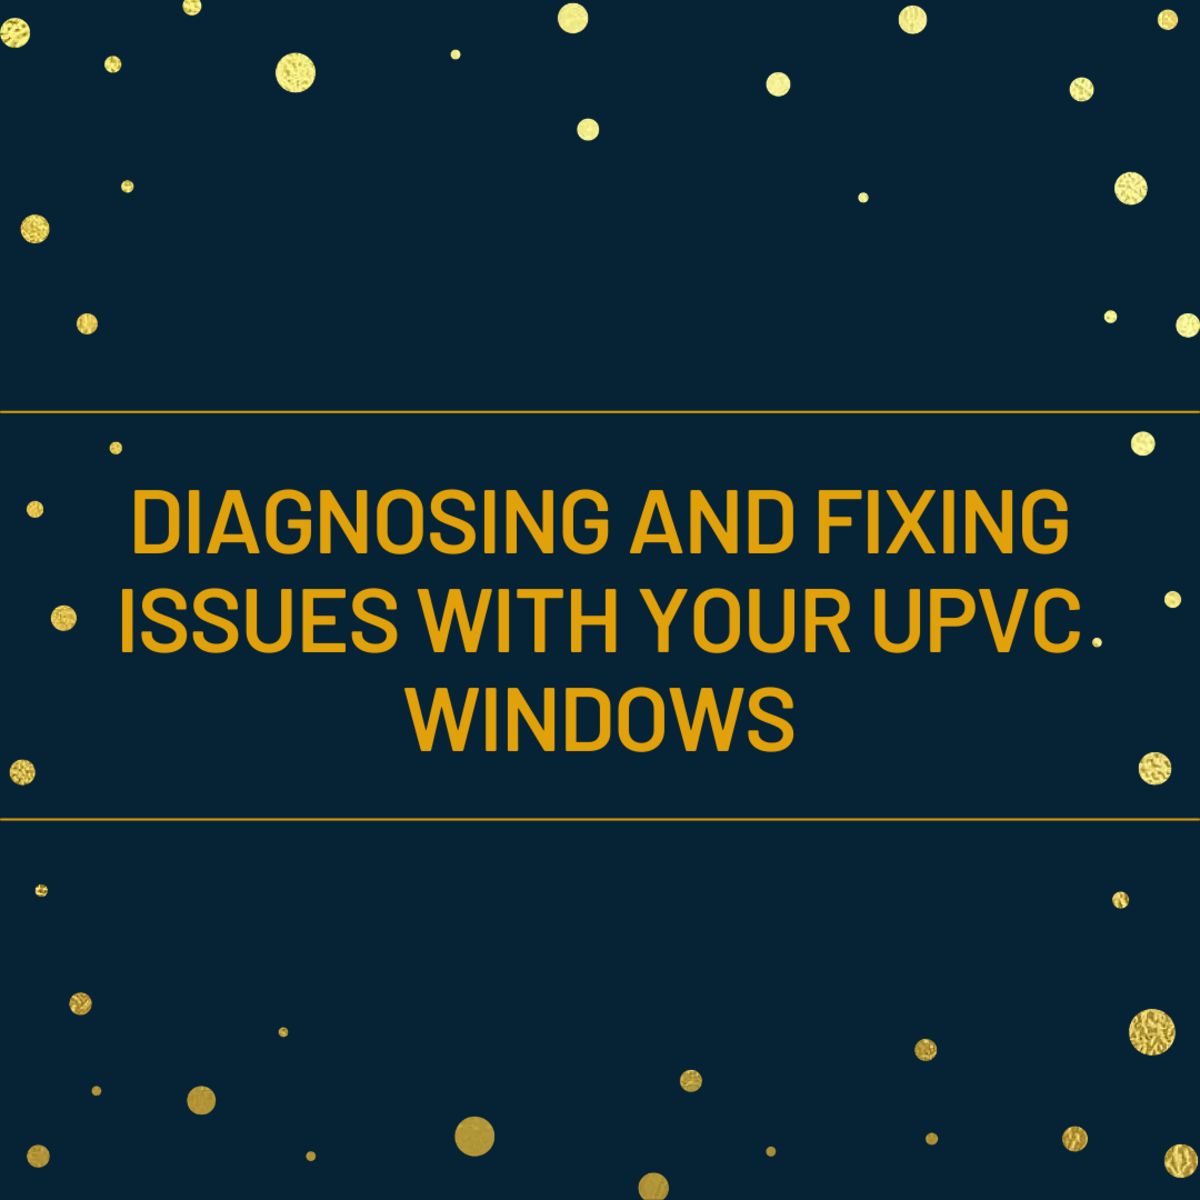 Why Is My uPVC Window Not Closing Properly?